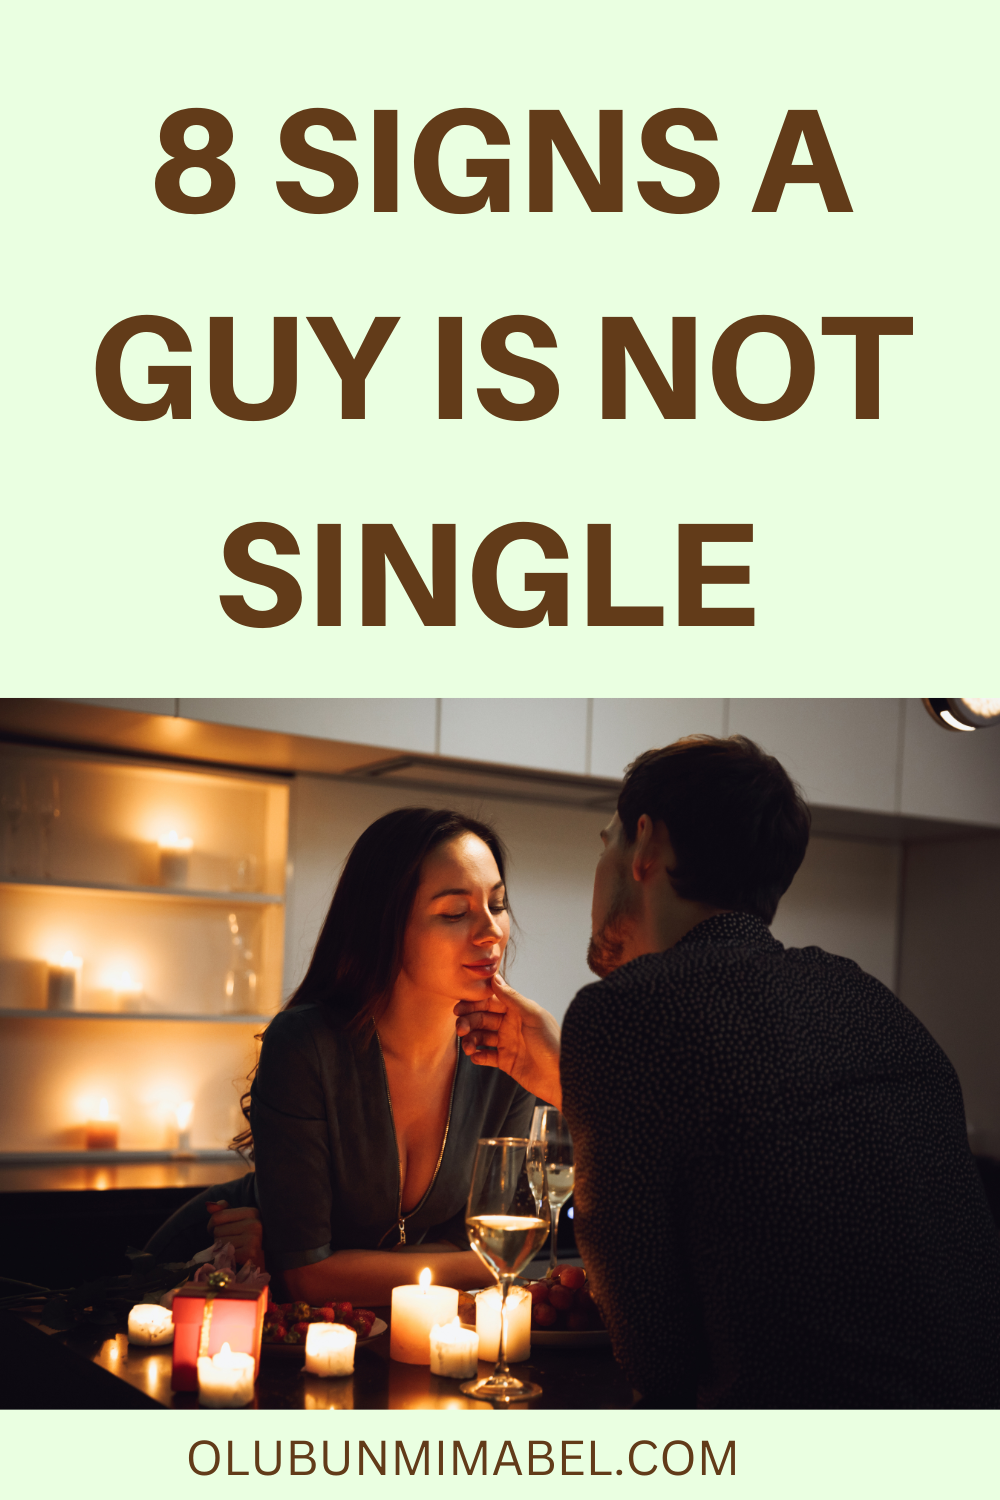 Signs He is Not Single